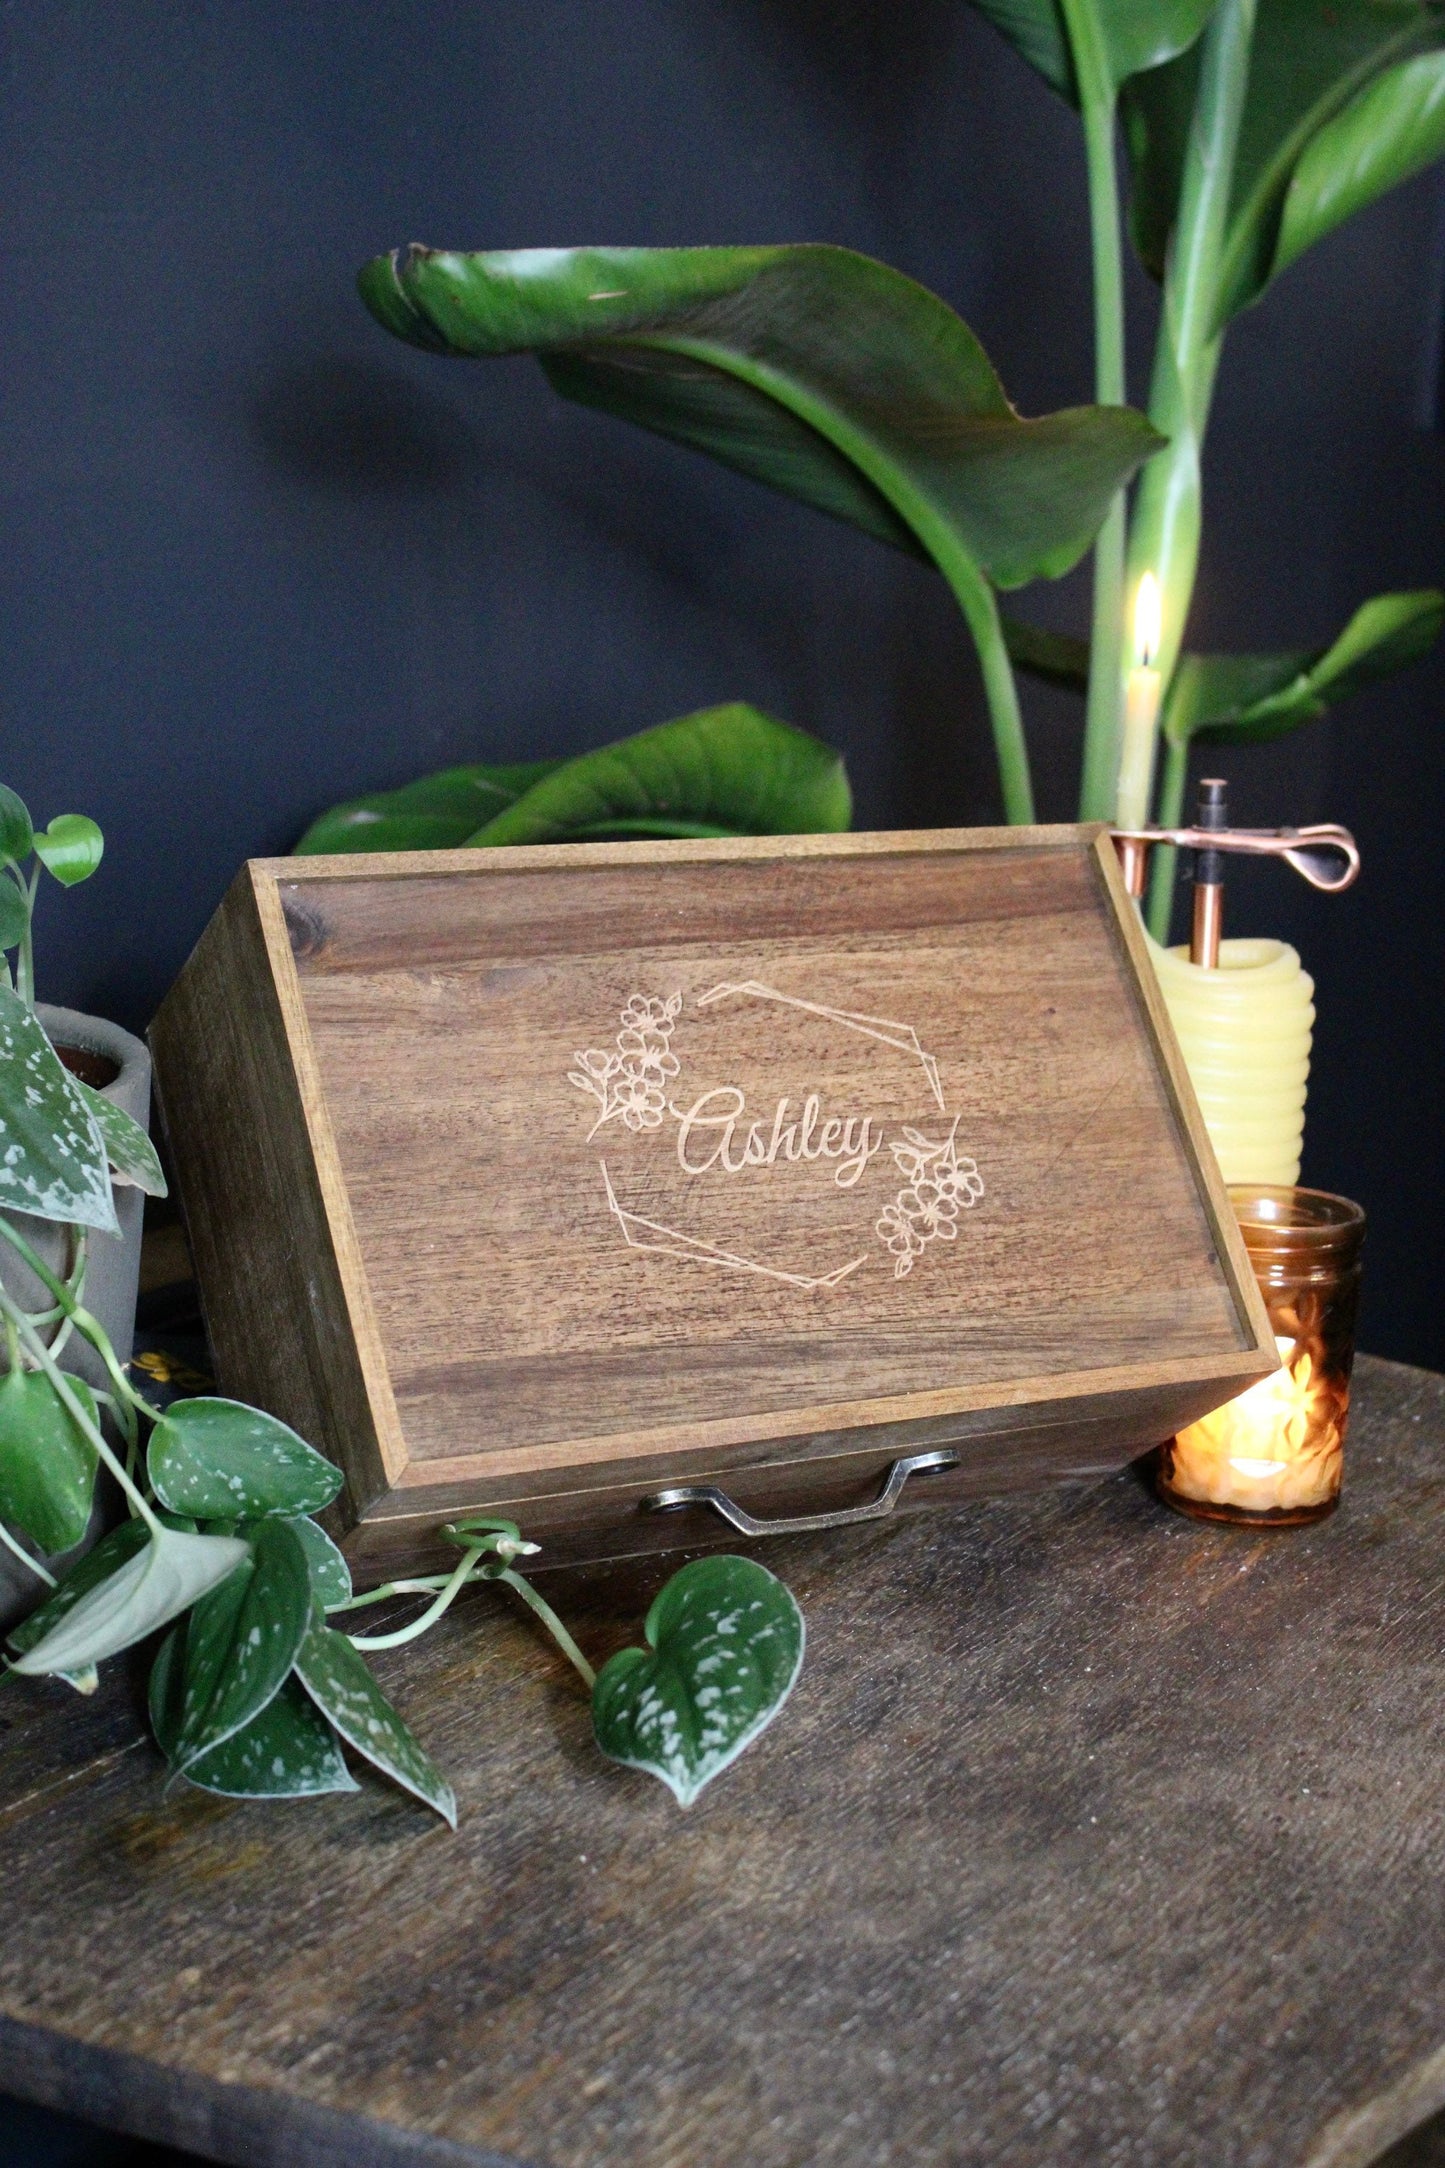 Birth Flower Personalized Acacia Wood Jewelry Box - Velvet Jewelry Box - Custom Jewelry Box - Jewelry Storage - Gifts for Women